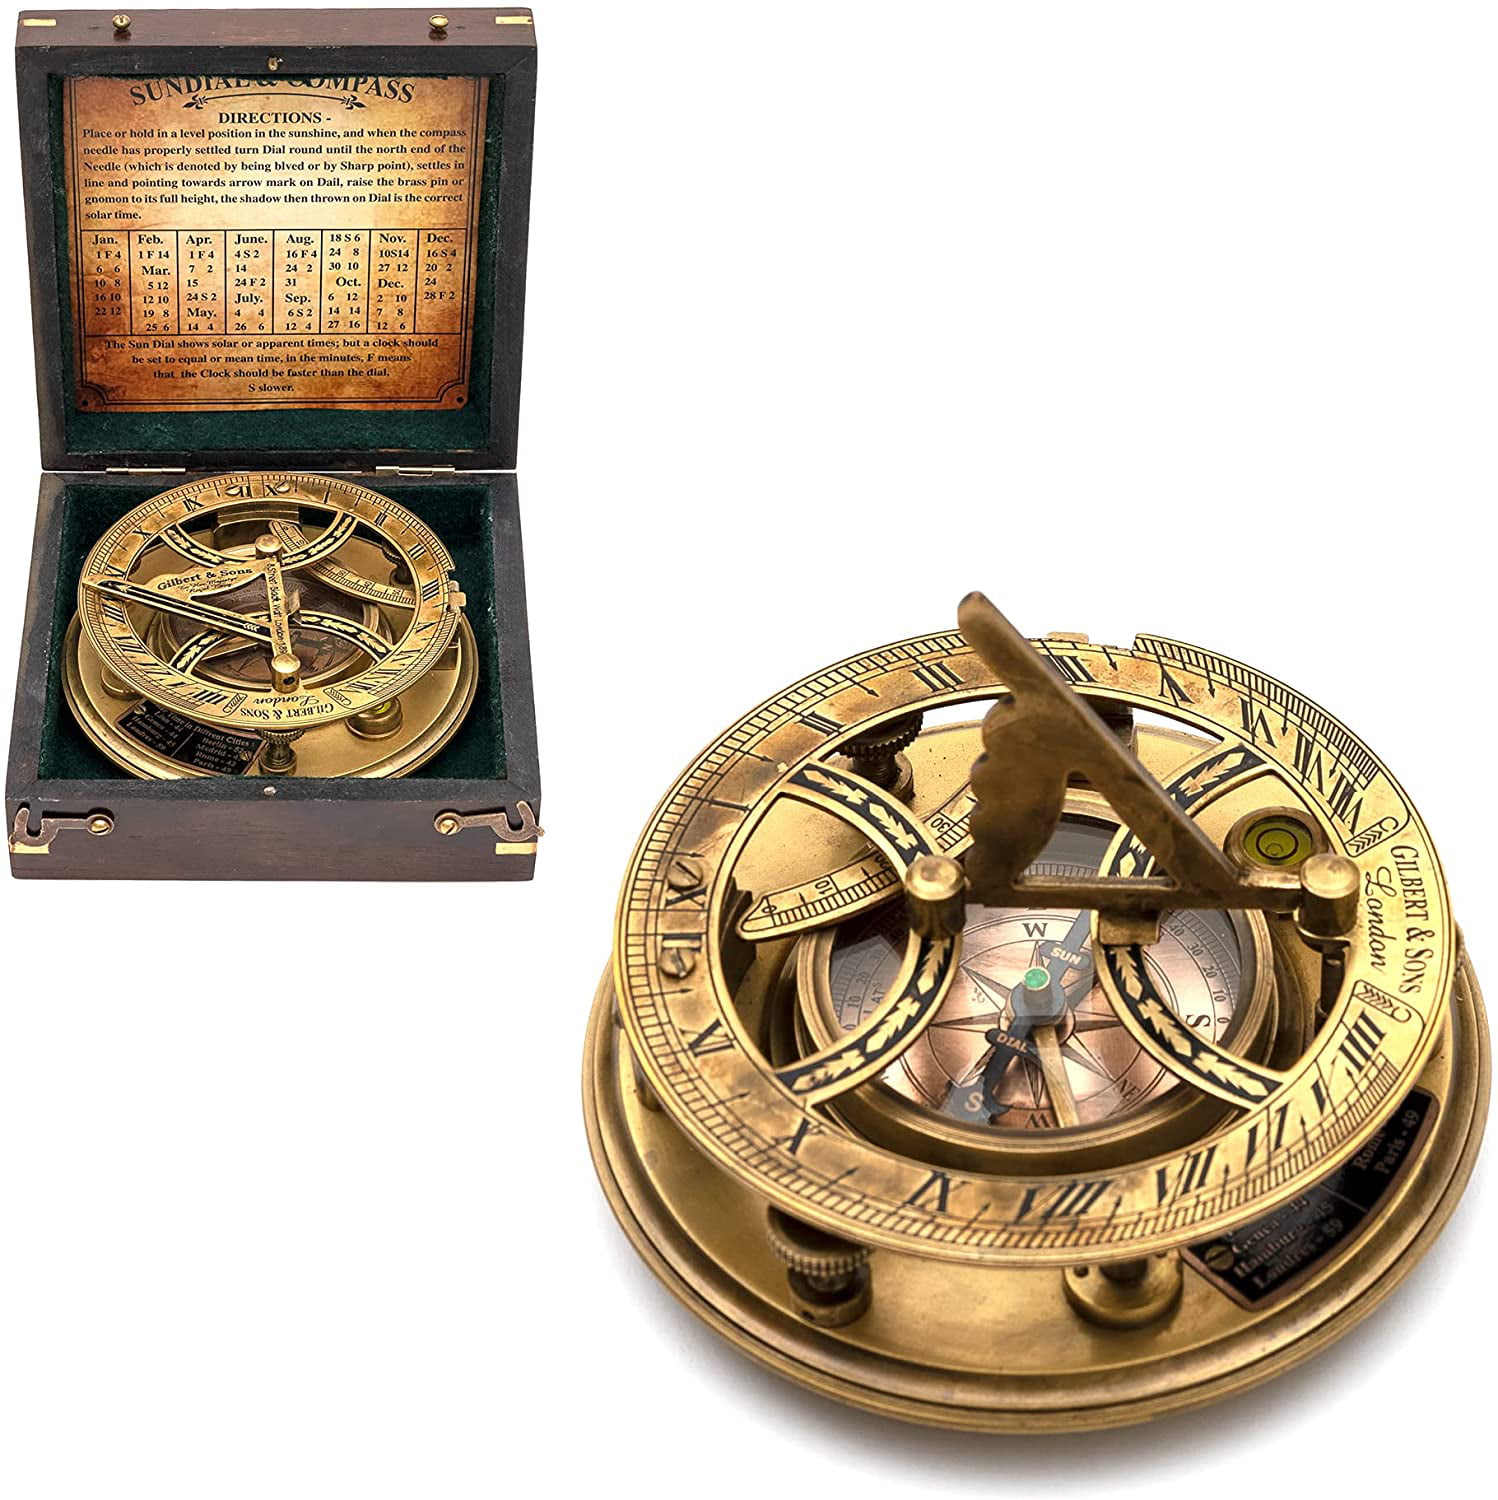 Rose London Vintage Pocket Sundial Antique Maritime Brass Compass With Time Zone 